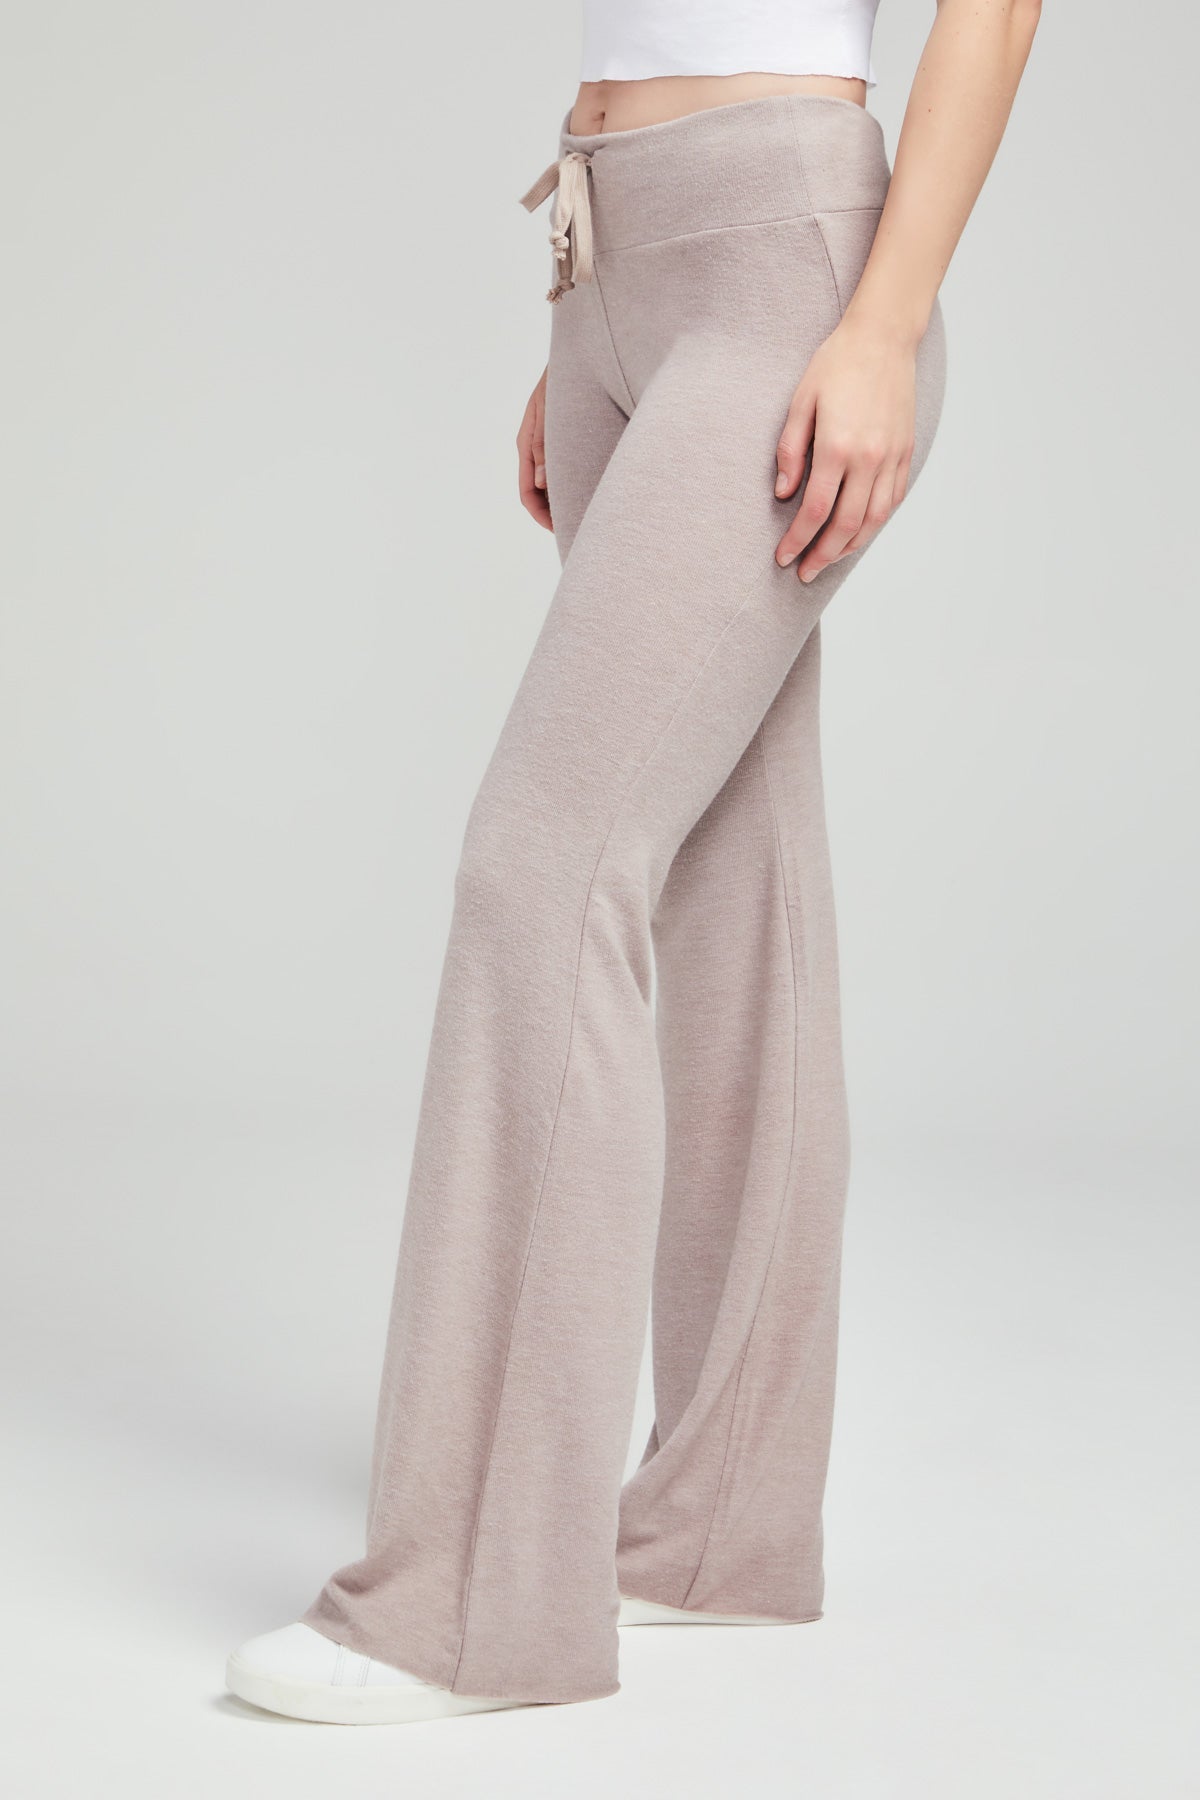 Wildfox POPPING BOTTLES TENNIS CLUB CHAMPAGNE VANILLA WHITE SOFT LOUNGE  PANTS M Size M - $43 New With Tags - From Donna